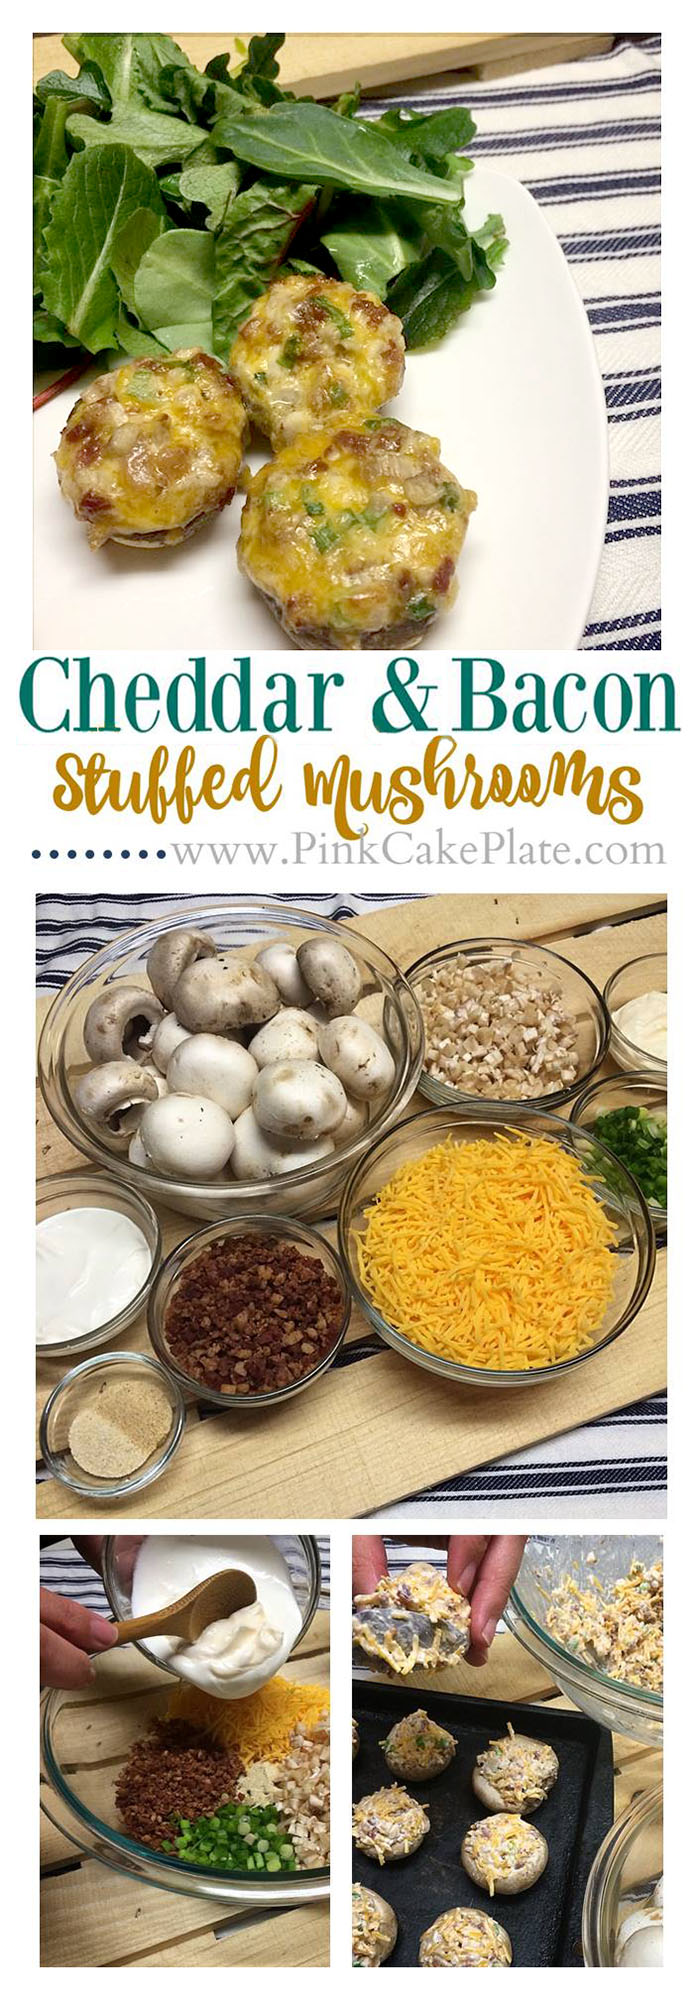 Game Day Cheddar Bacon Stuffed Mushrooms - Pink Cake Plate